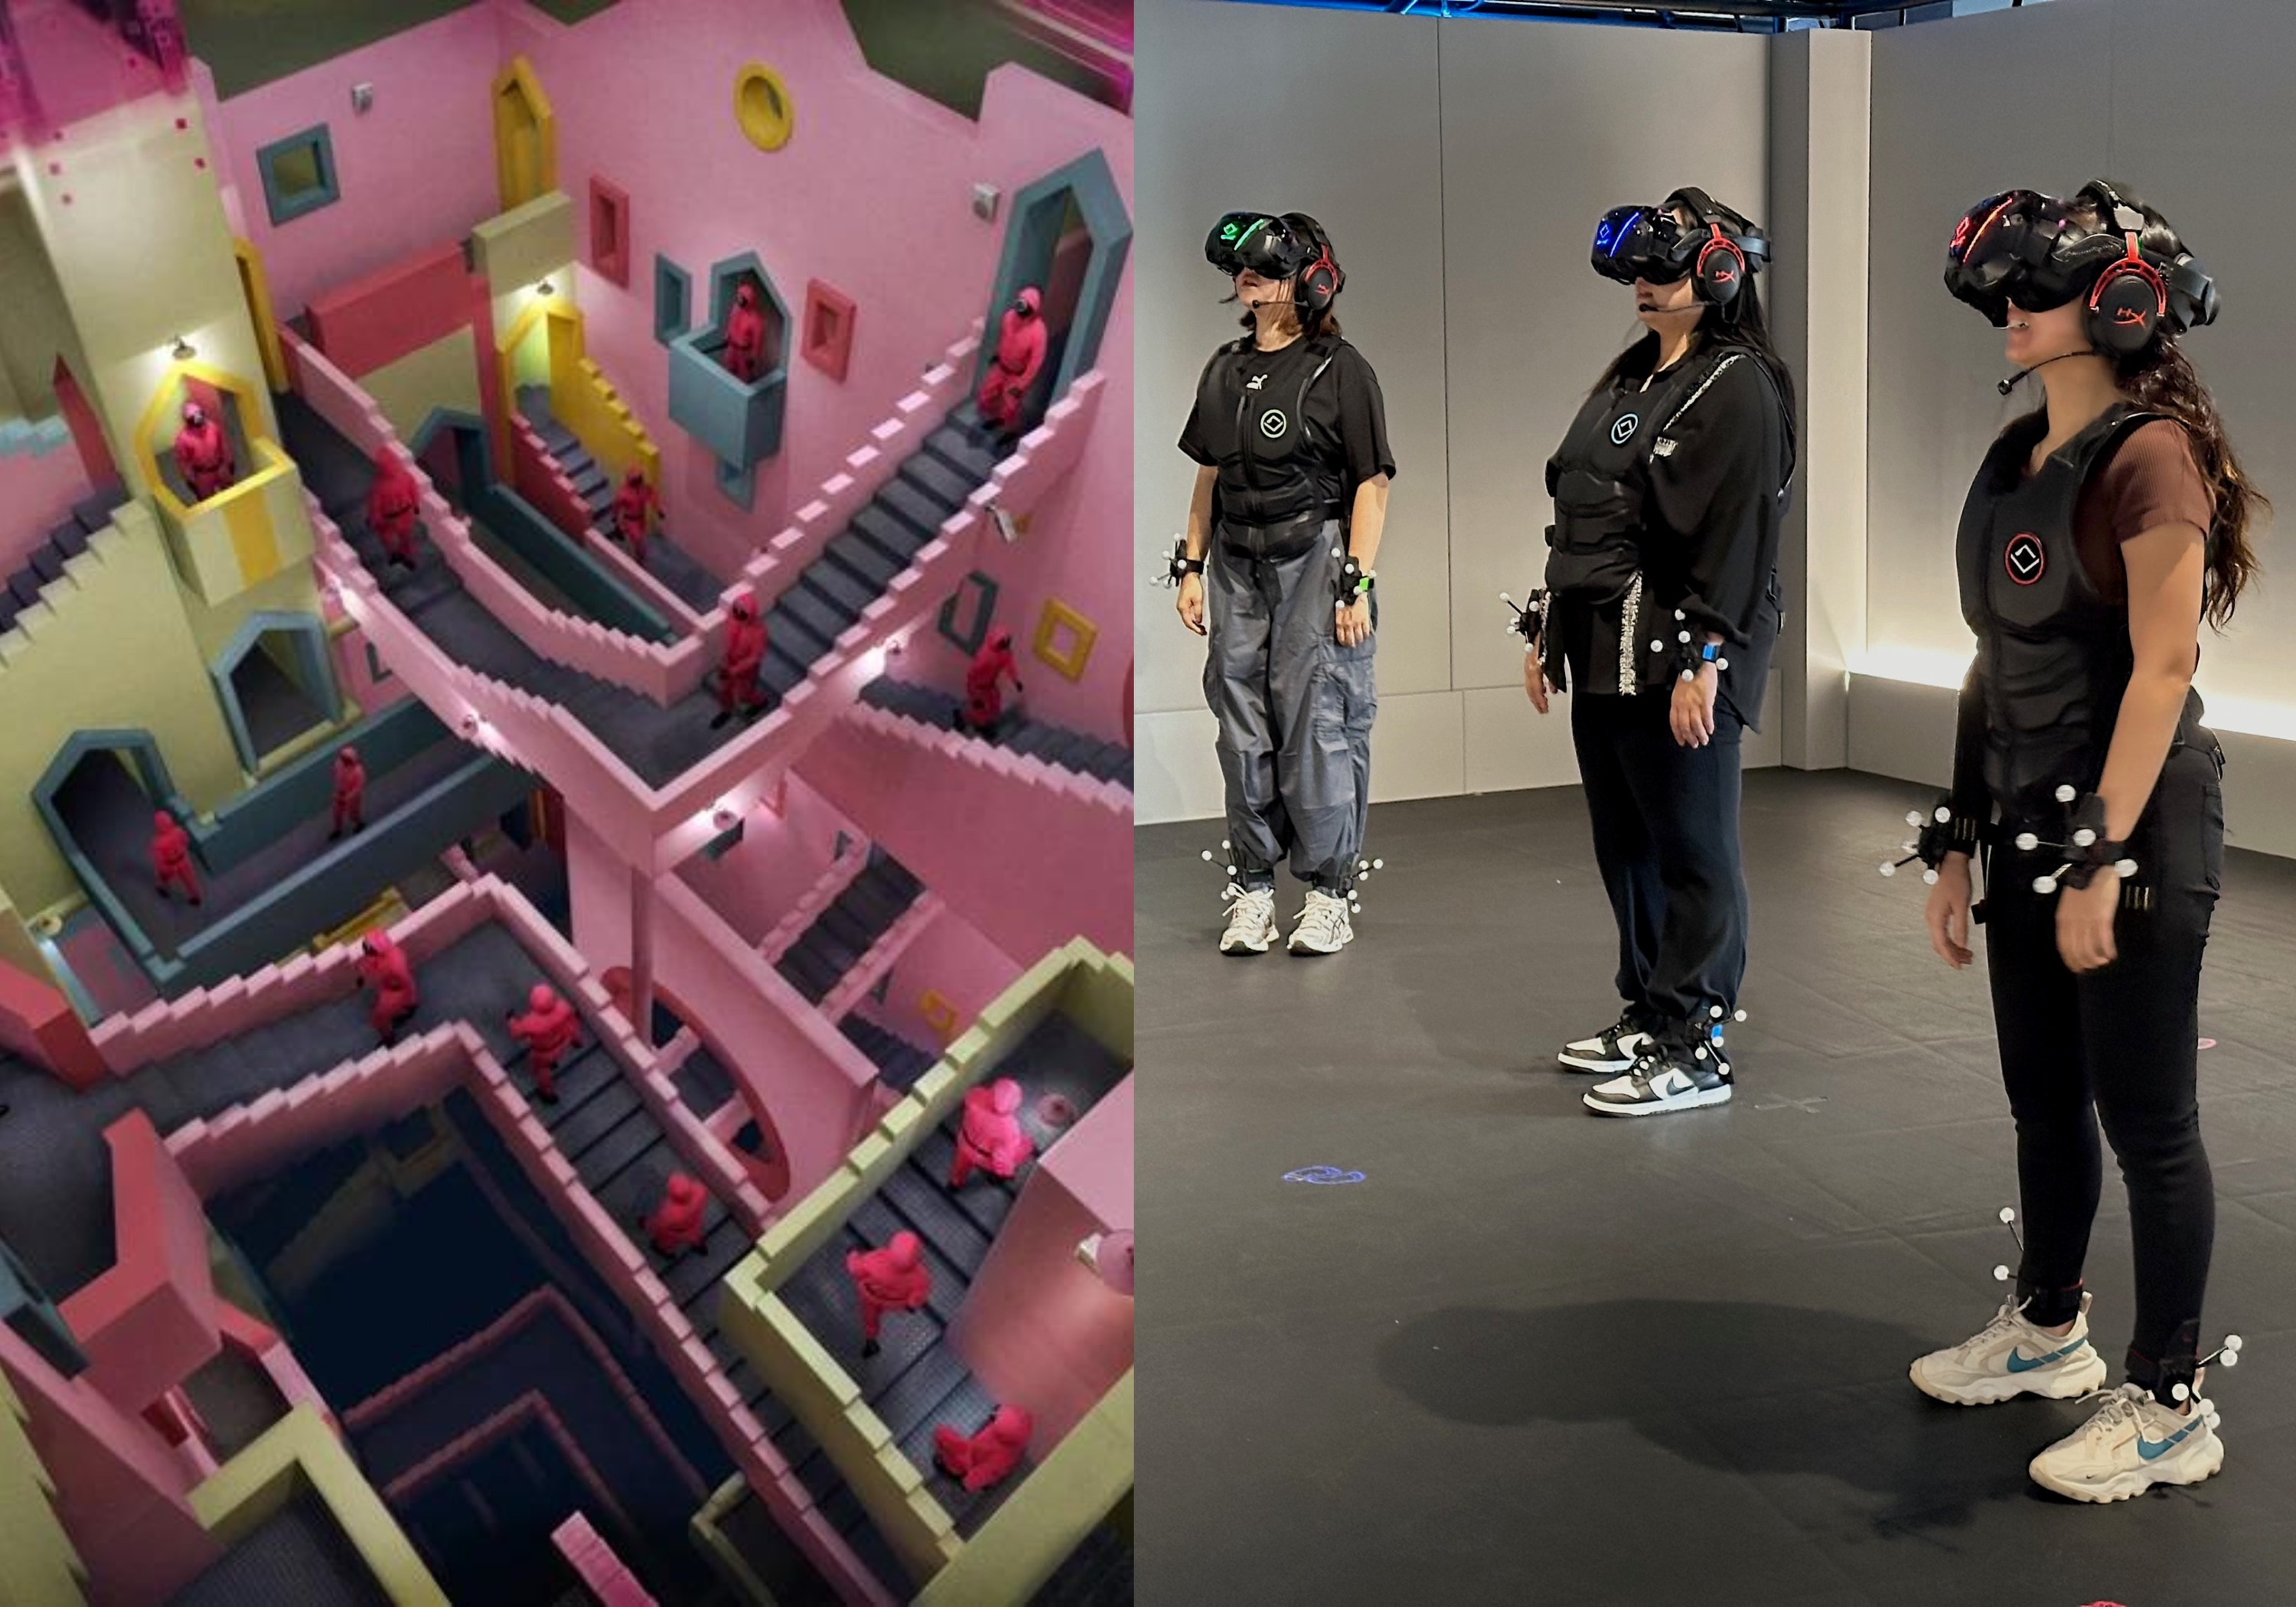 You can now play the games from 'Squid Game' using VR in Hong Kong